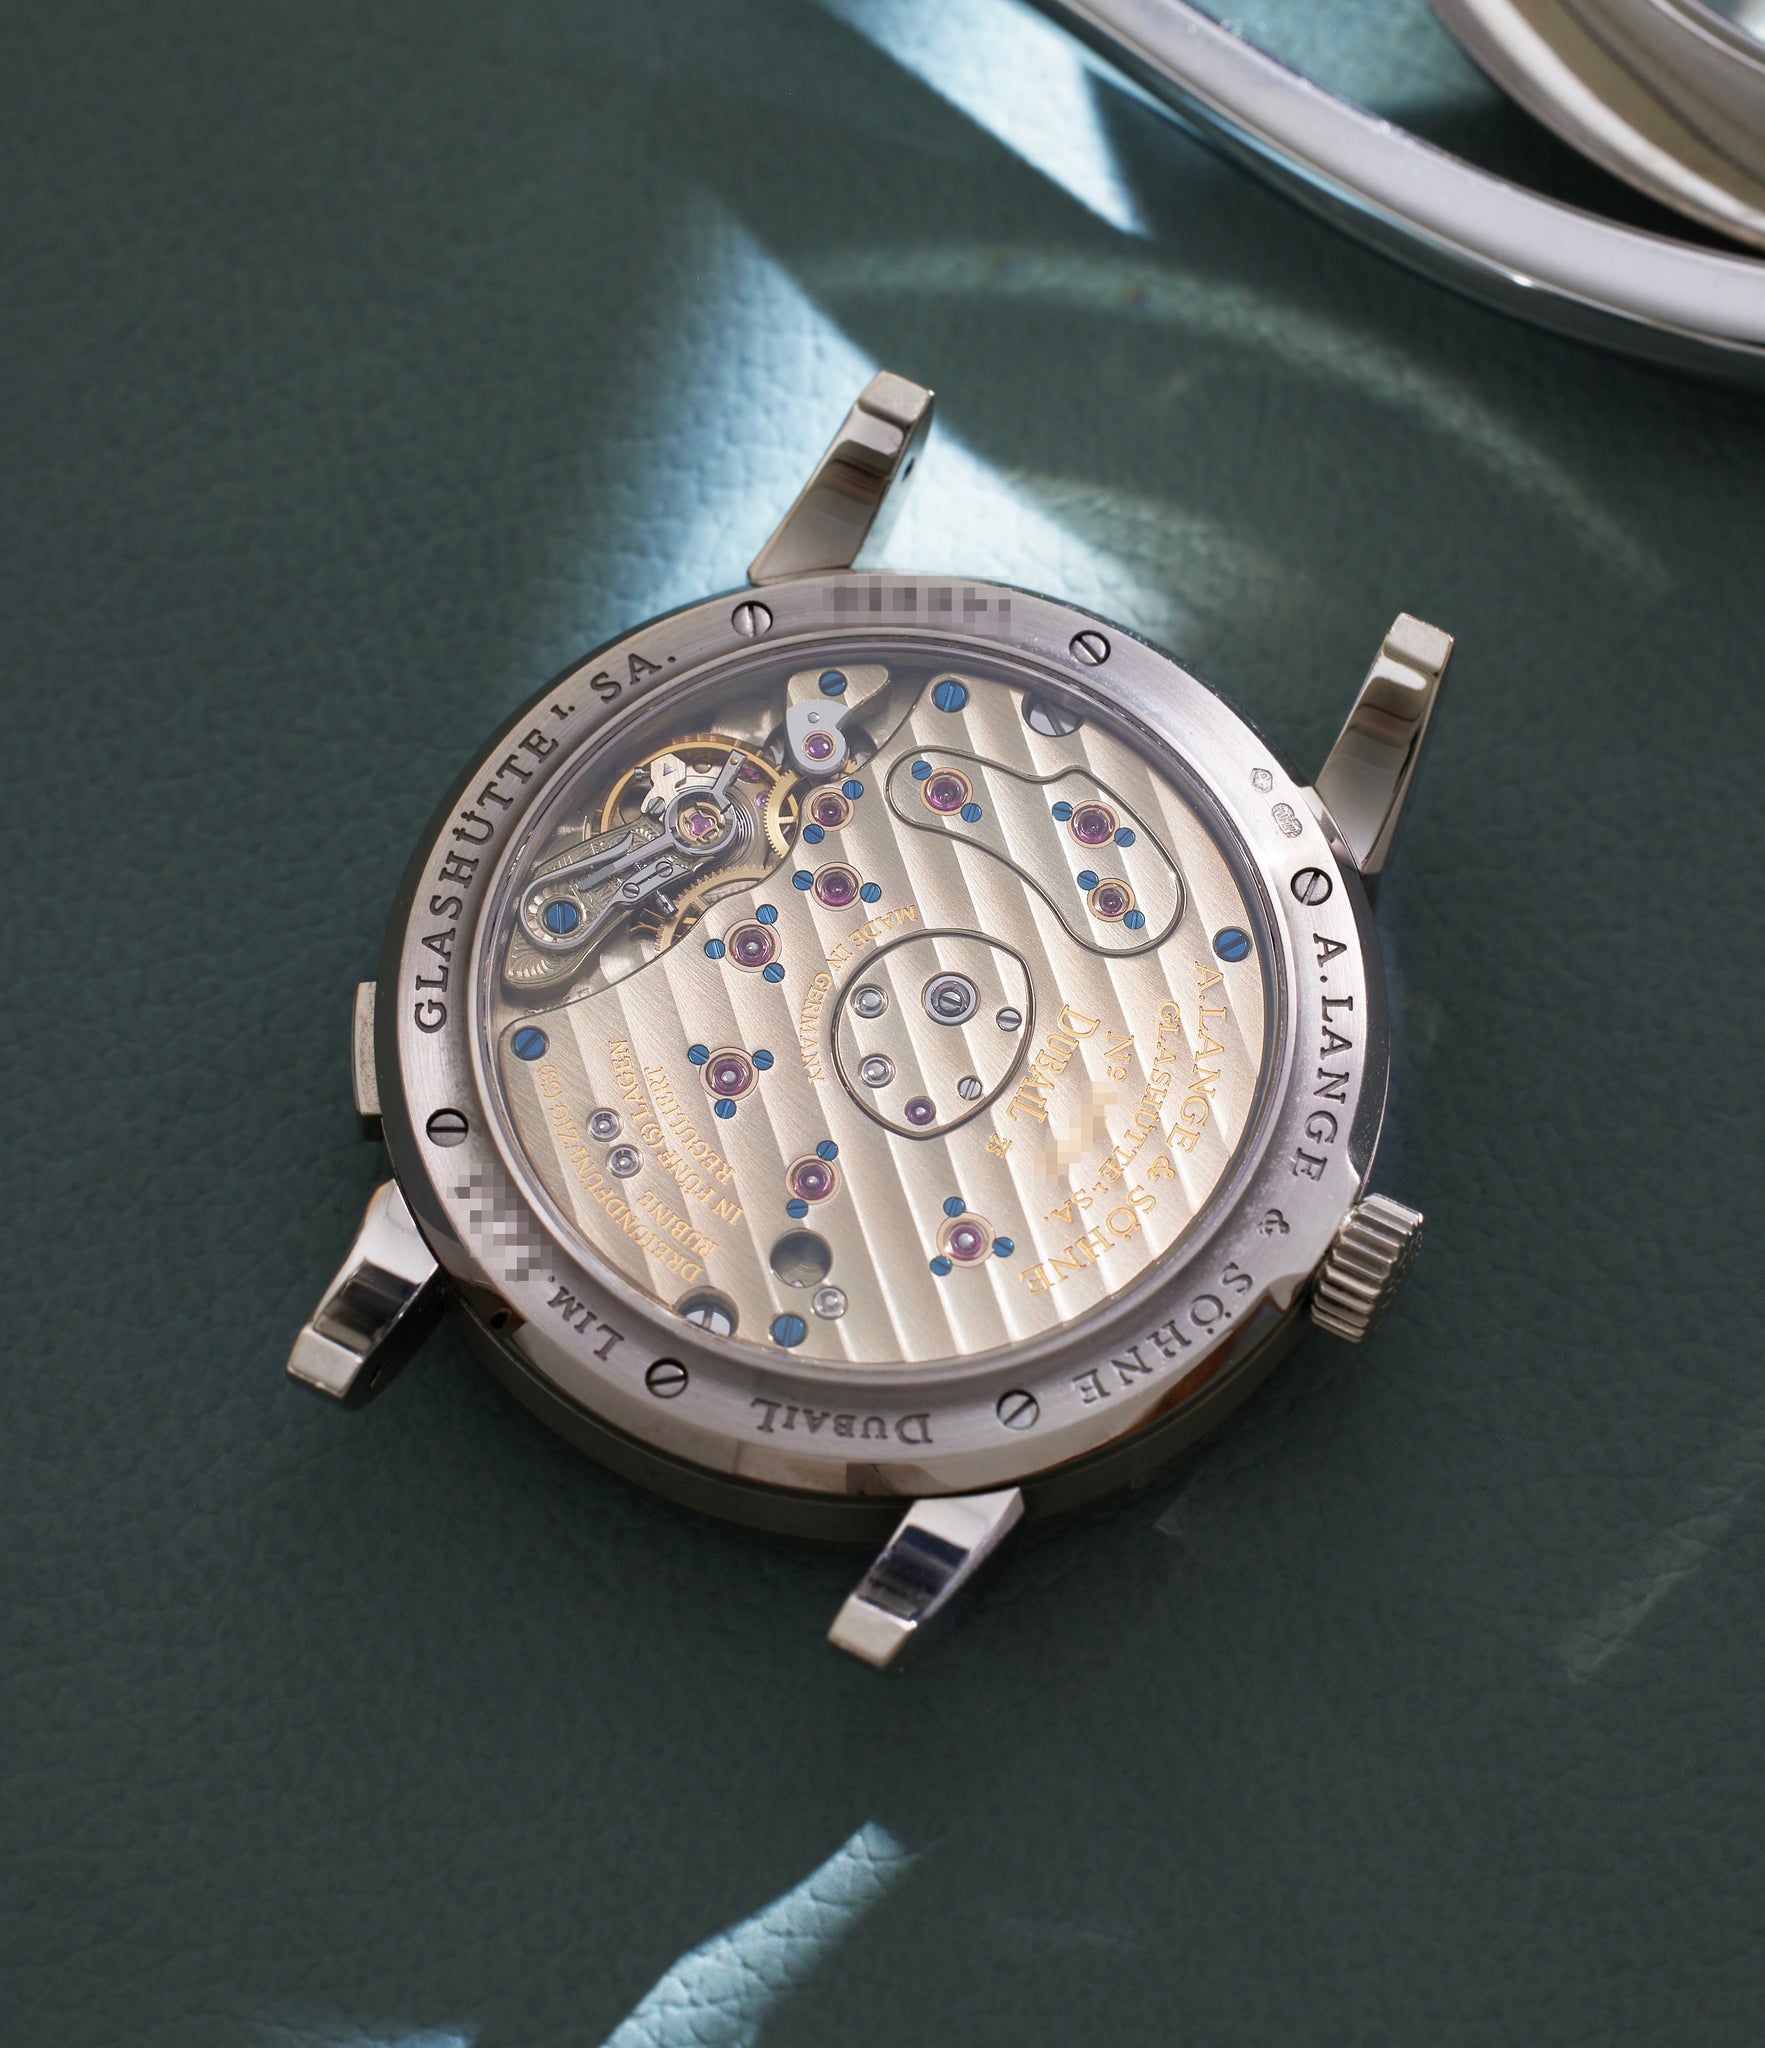 A.Lange & Söhne | Lange 1 “Soirée” Dubail 110.049 | White Gold | A Collected Man | Available worldwide | Back of watch